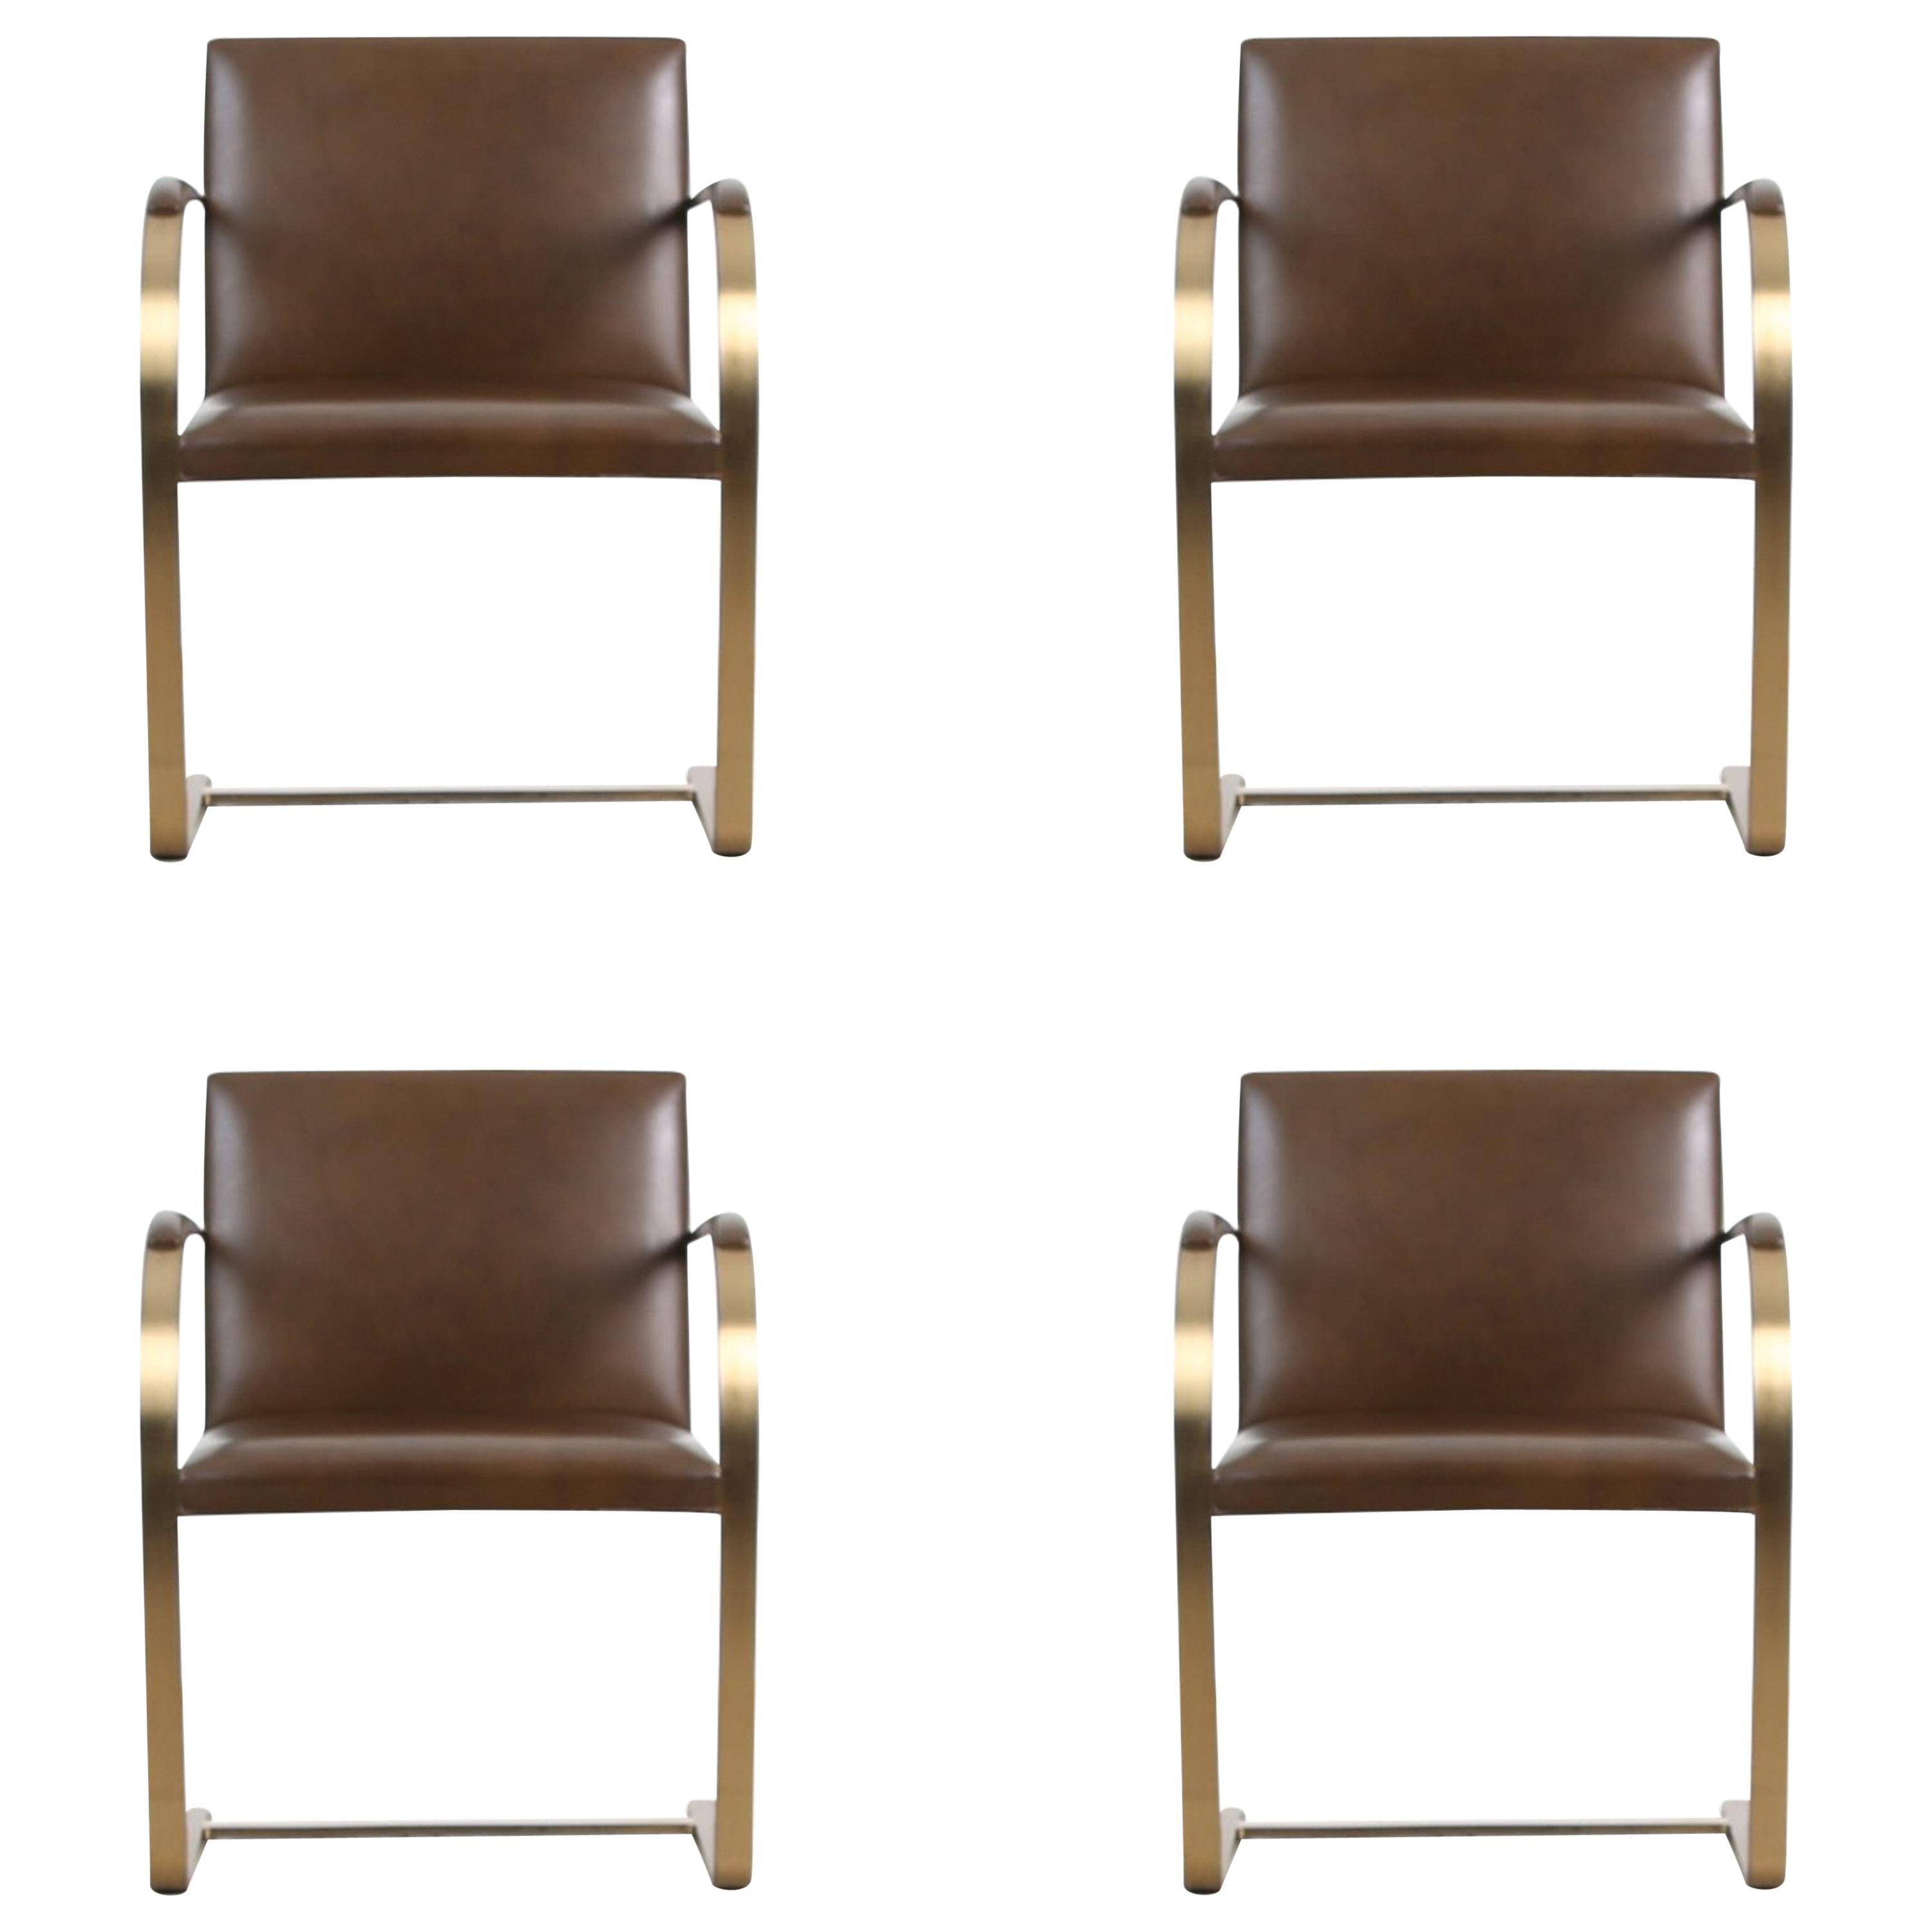 Brass "Brno" Chairs by Mies Van Der Rohe for Knoll International, Signed 1976